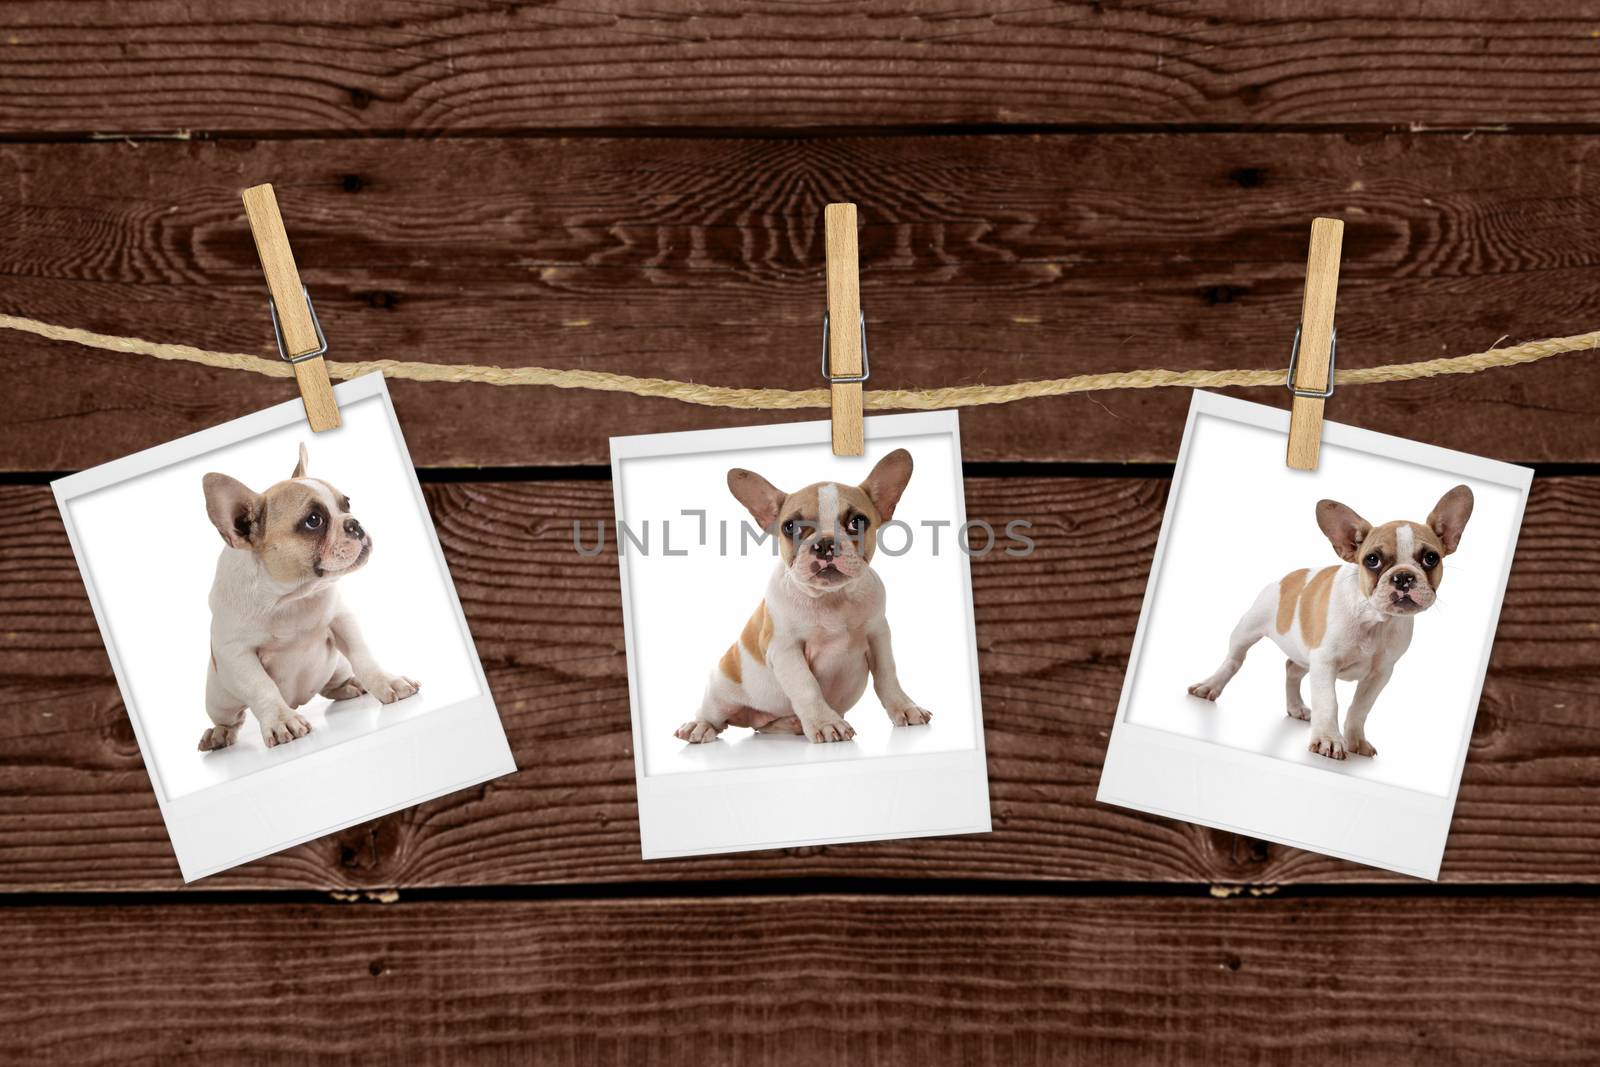  Pictures Hanging on a Rope of an Adorable Puppy by tobkatrina